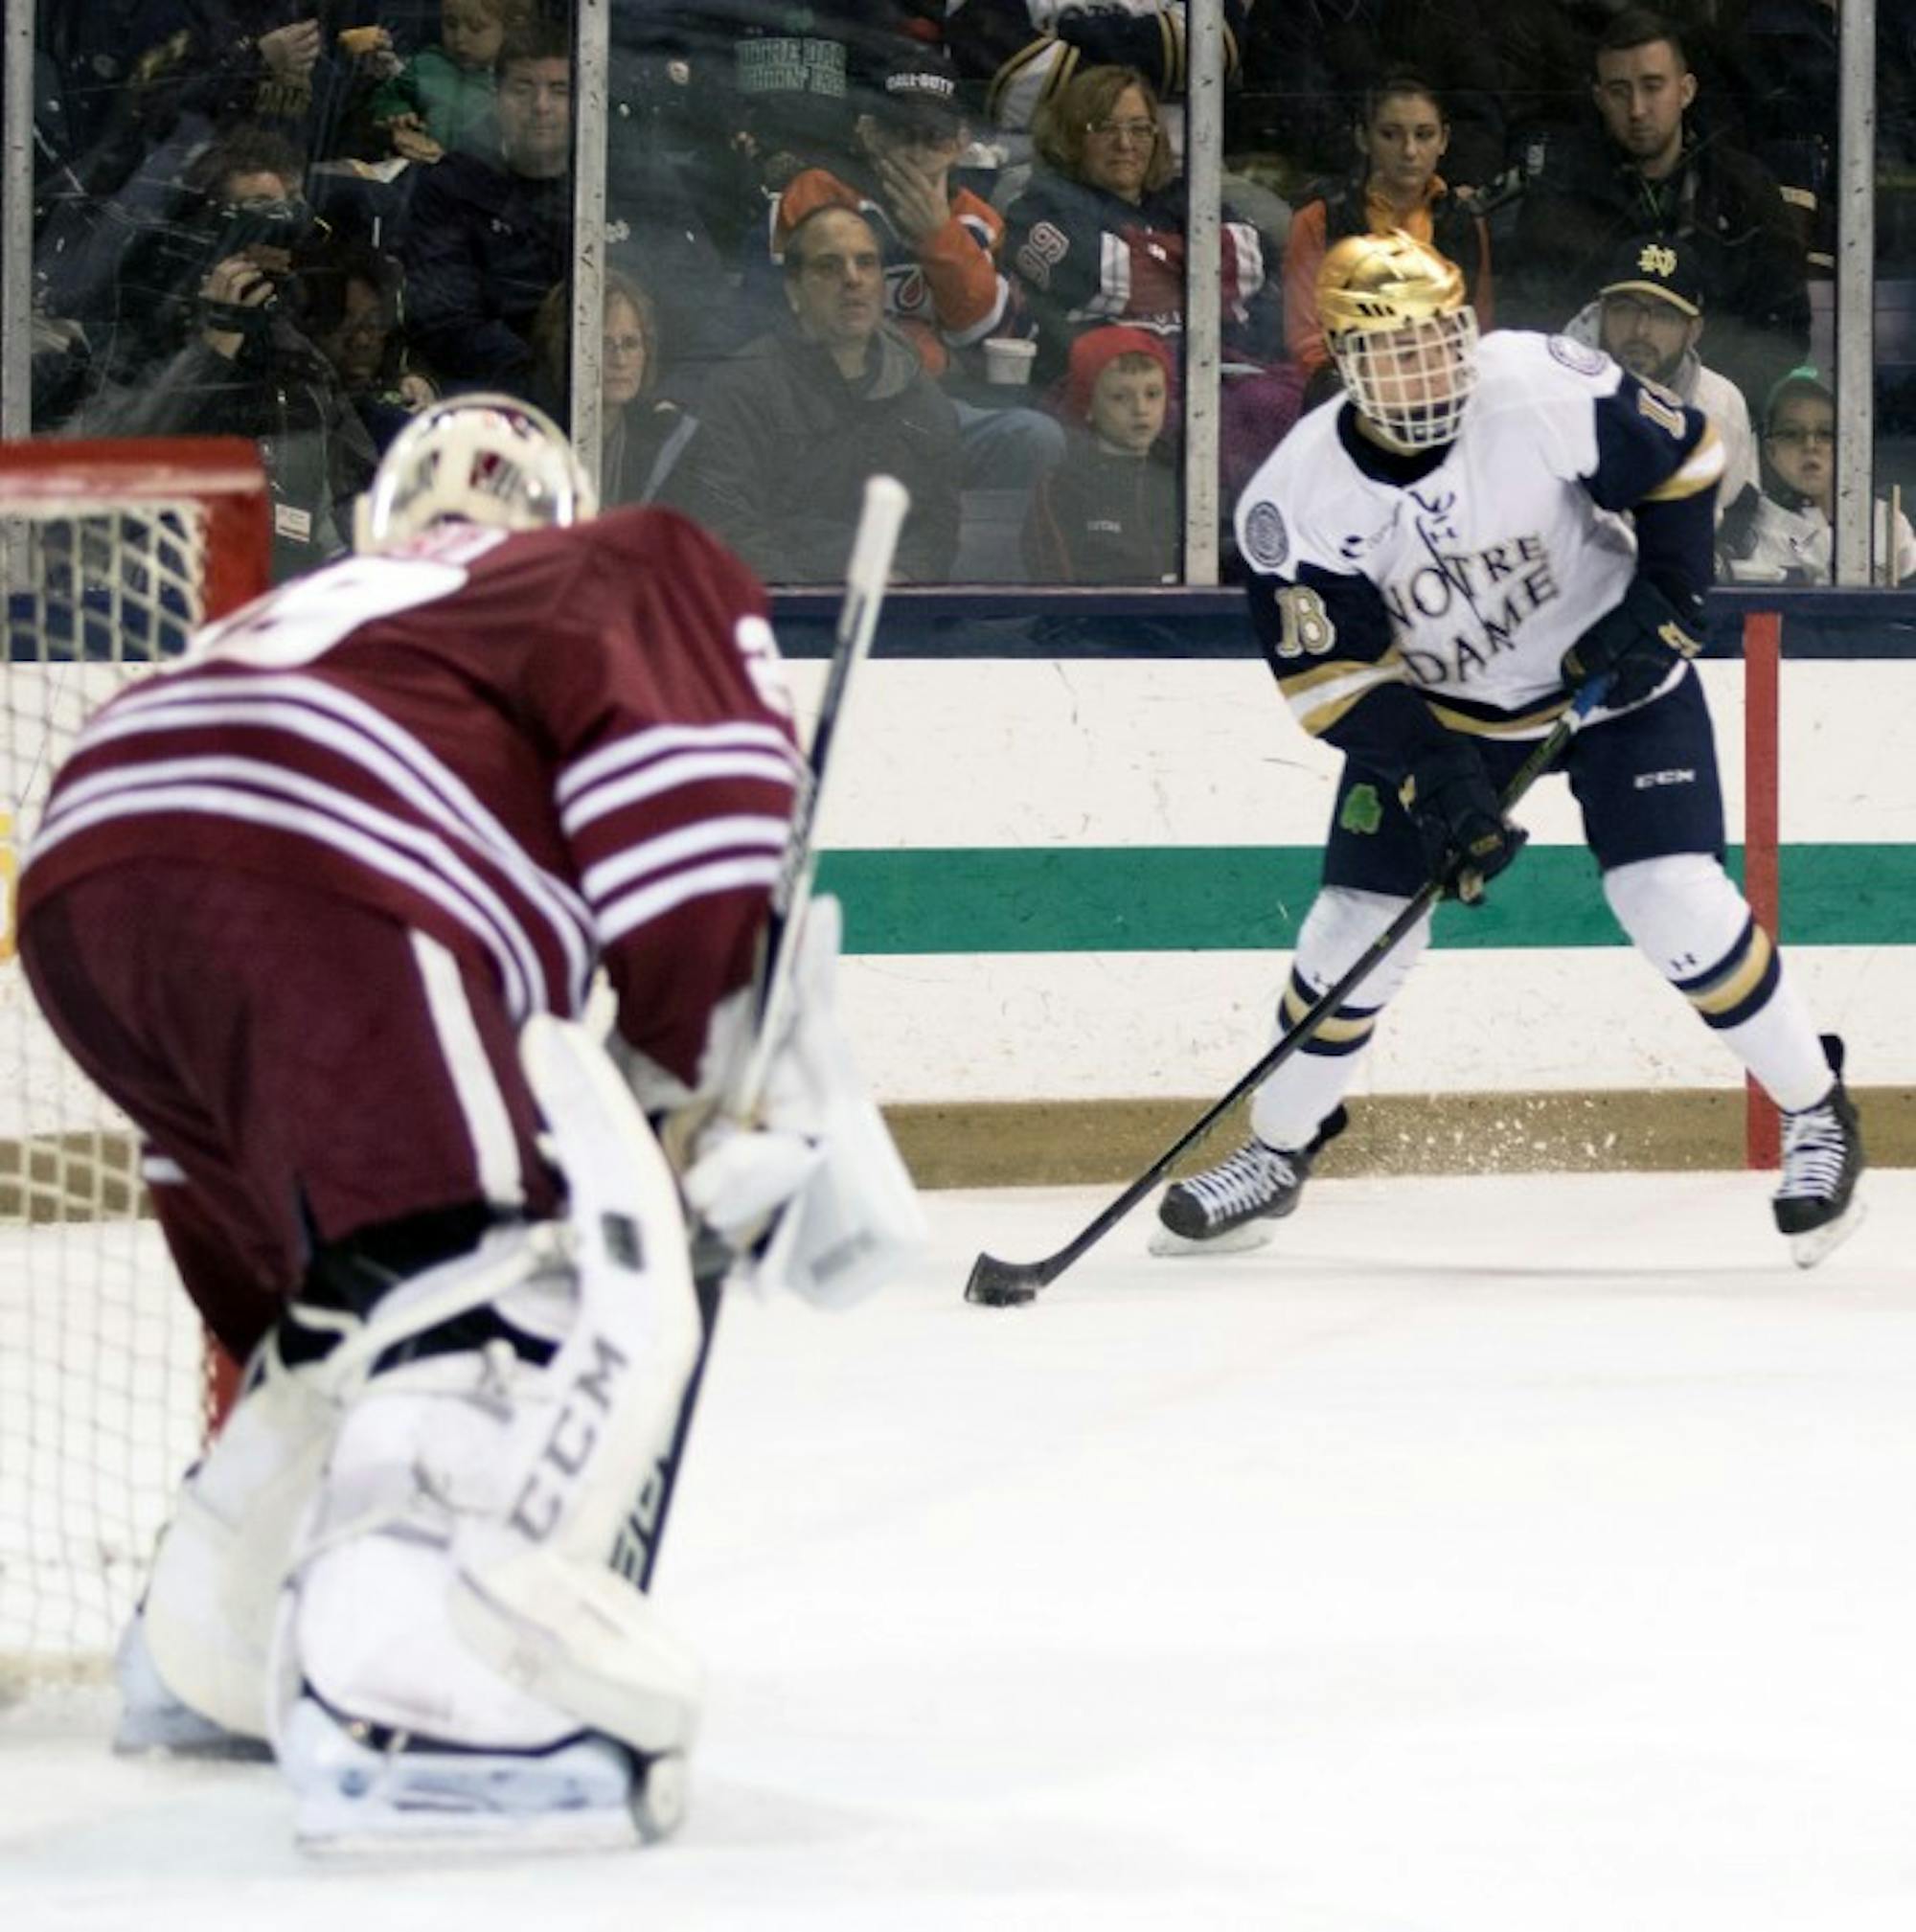 Sophomore center Jake Evans looks to pass the puck during Notre Dame’s 5-1 victory over UMass at Compton Family Ice Arena.